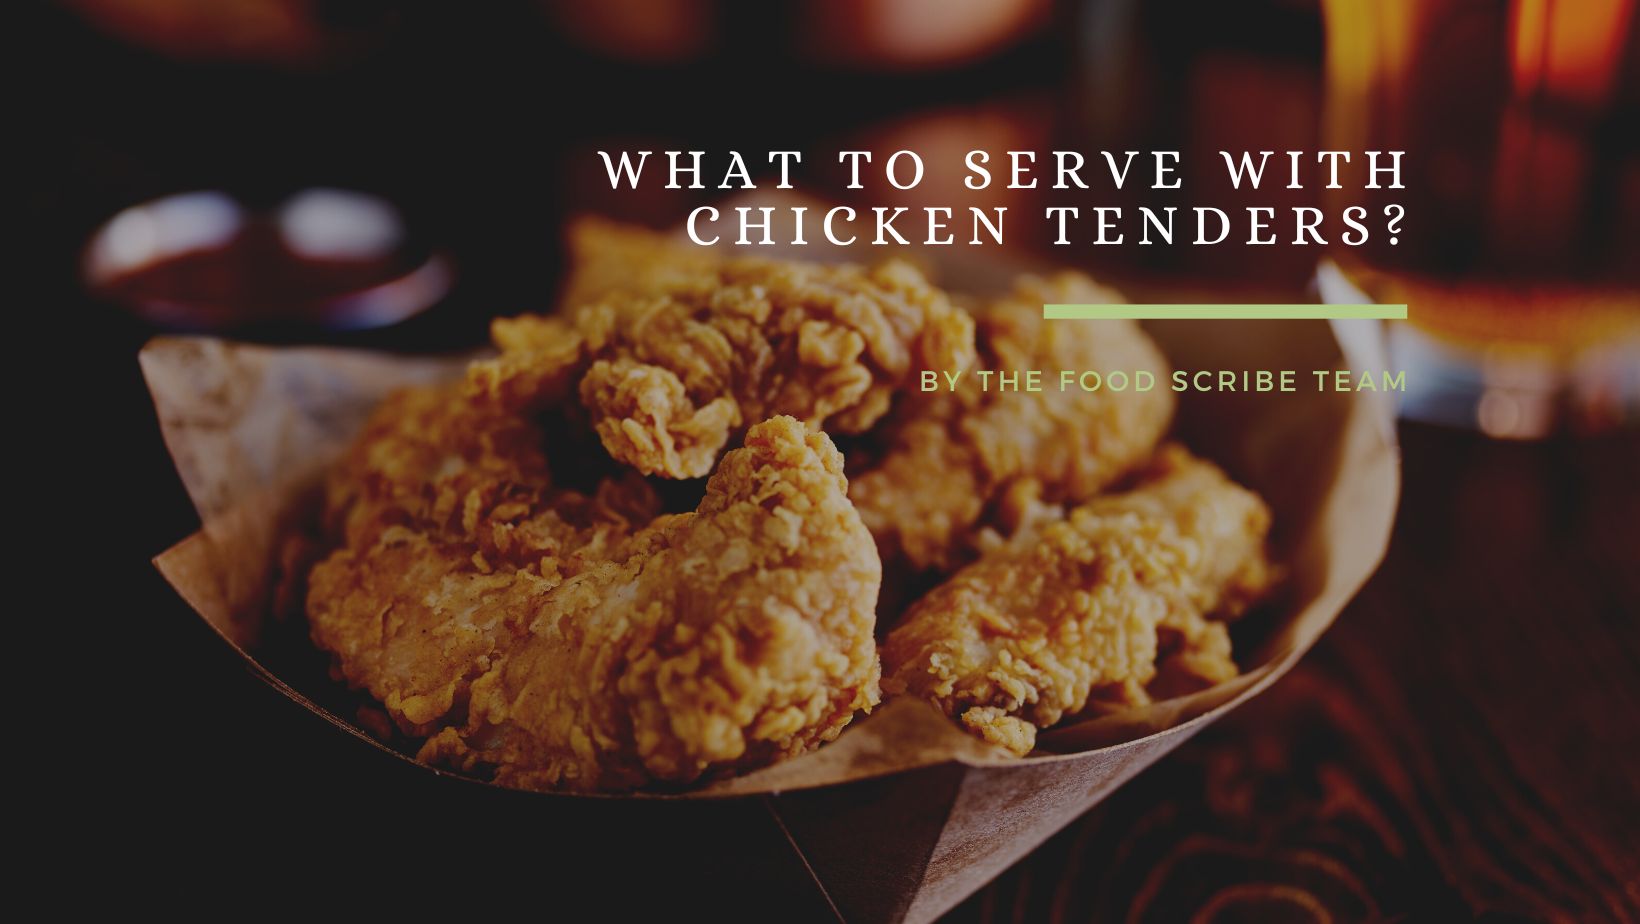 What to Serve with Chicken Tenders